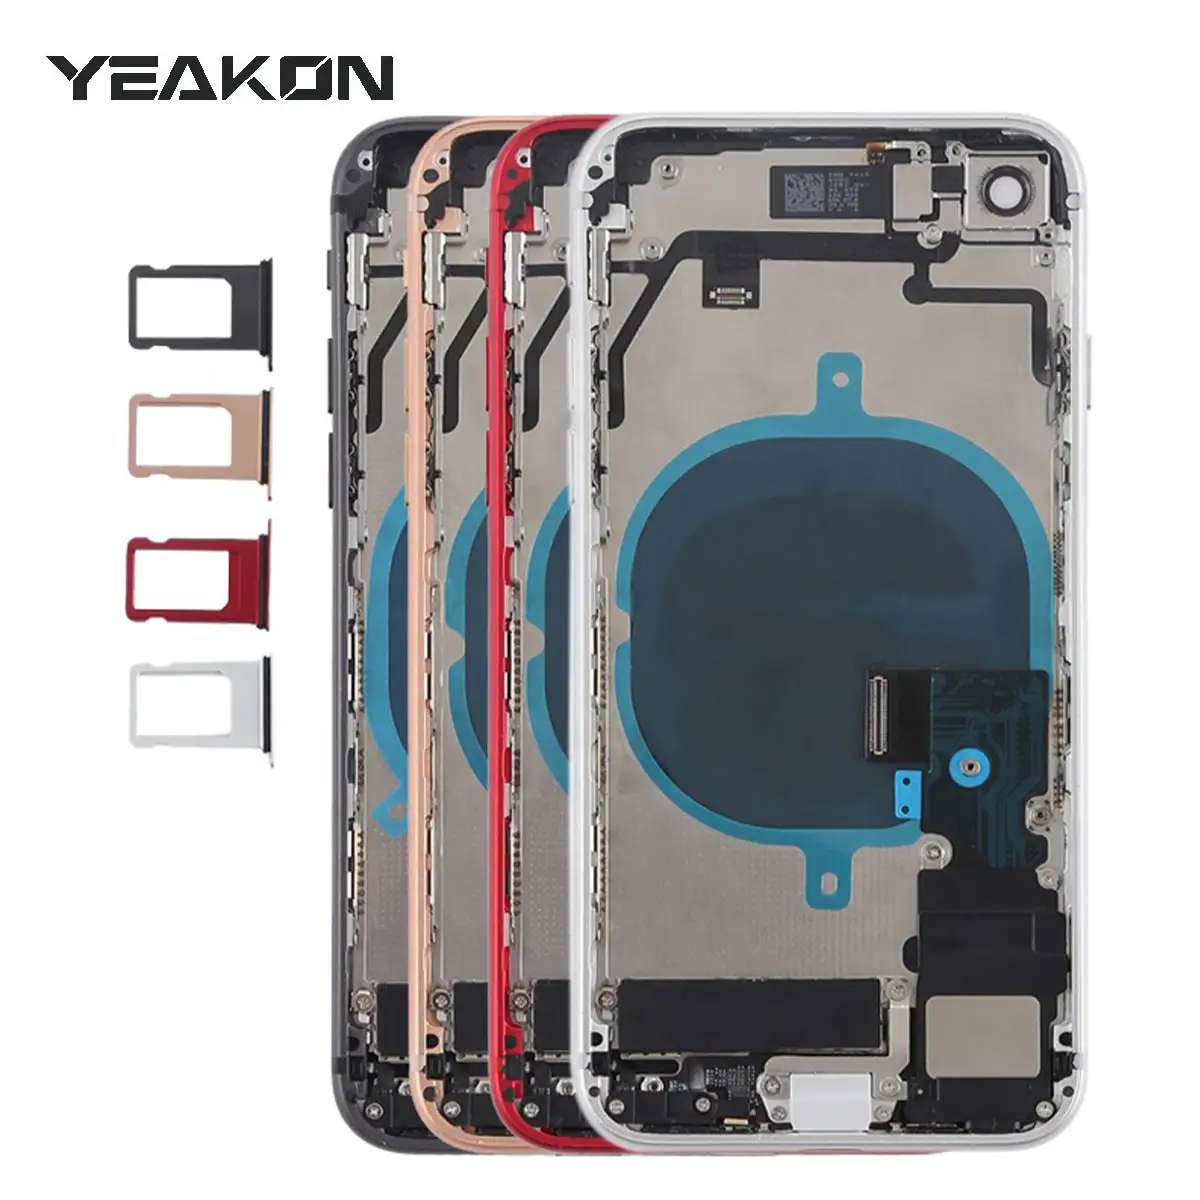 Mobile phone Back glass Housing Battery Cover For iphone 6 6S plus 7 plus 8 8 plus body Middle Frame